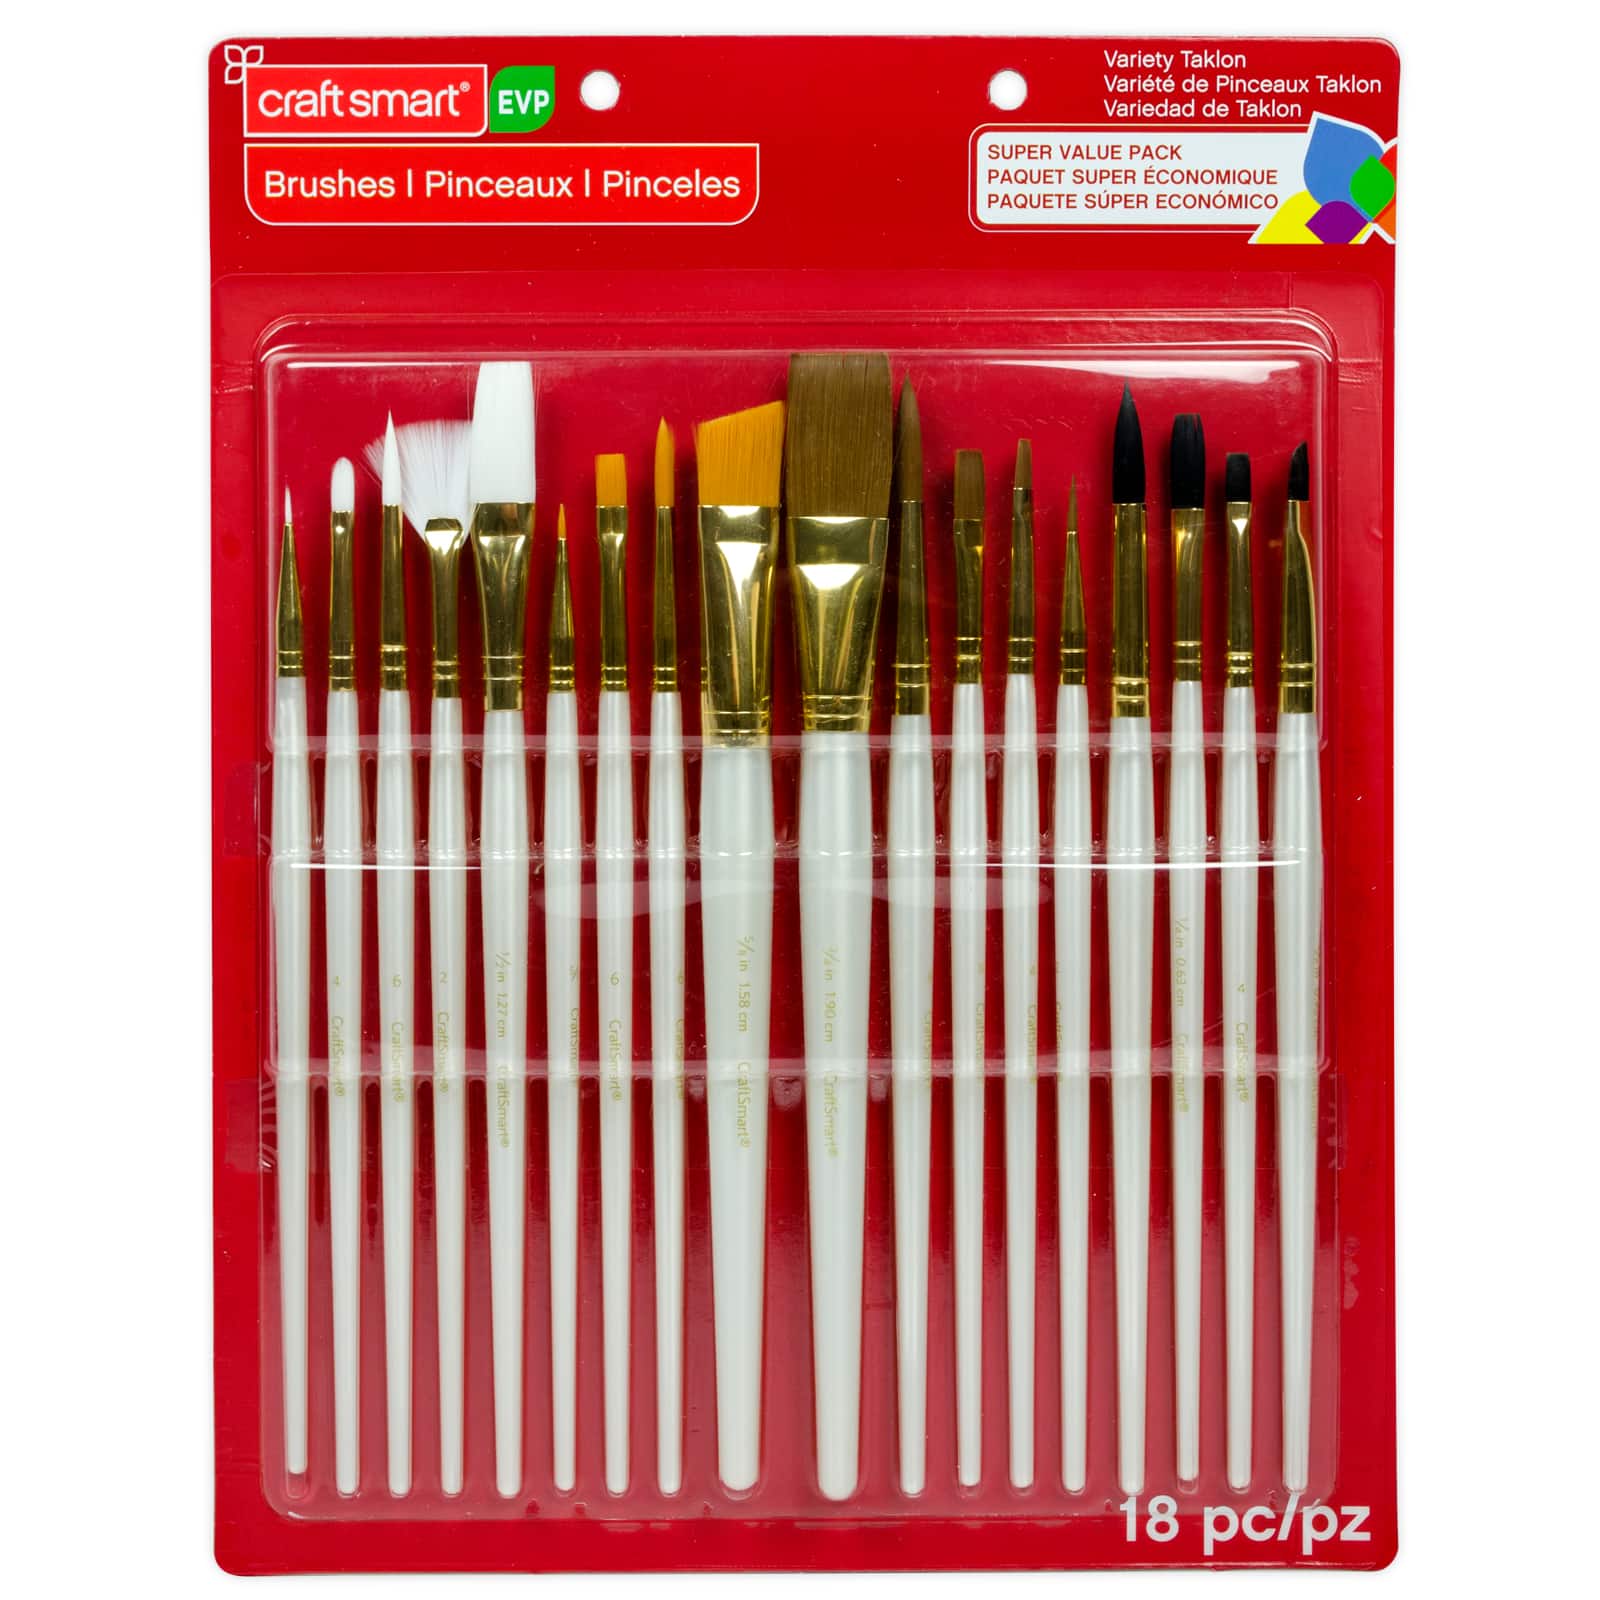 9 Packs: 18 ct. (162 total) Variety Taklon Brush Super Value Pack by Craft Smart&#xAE;